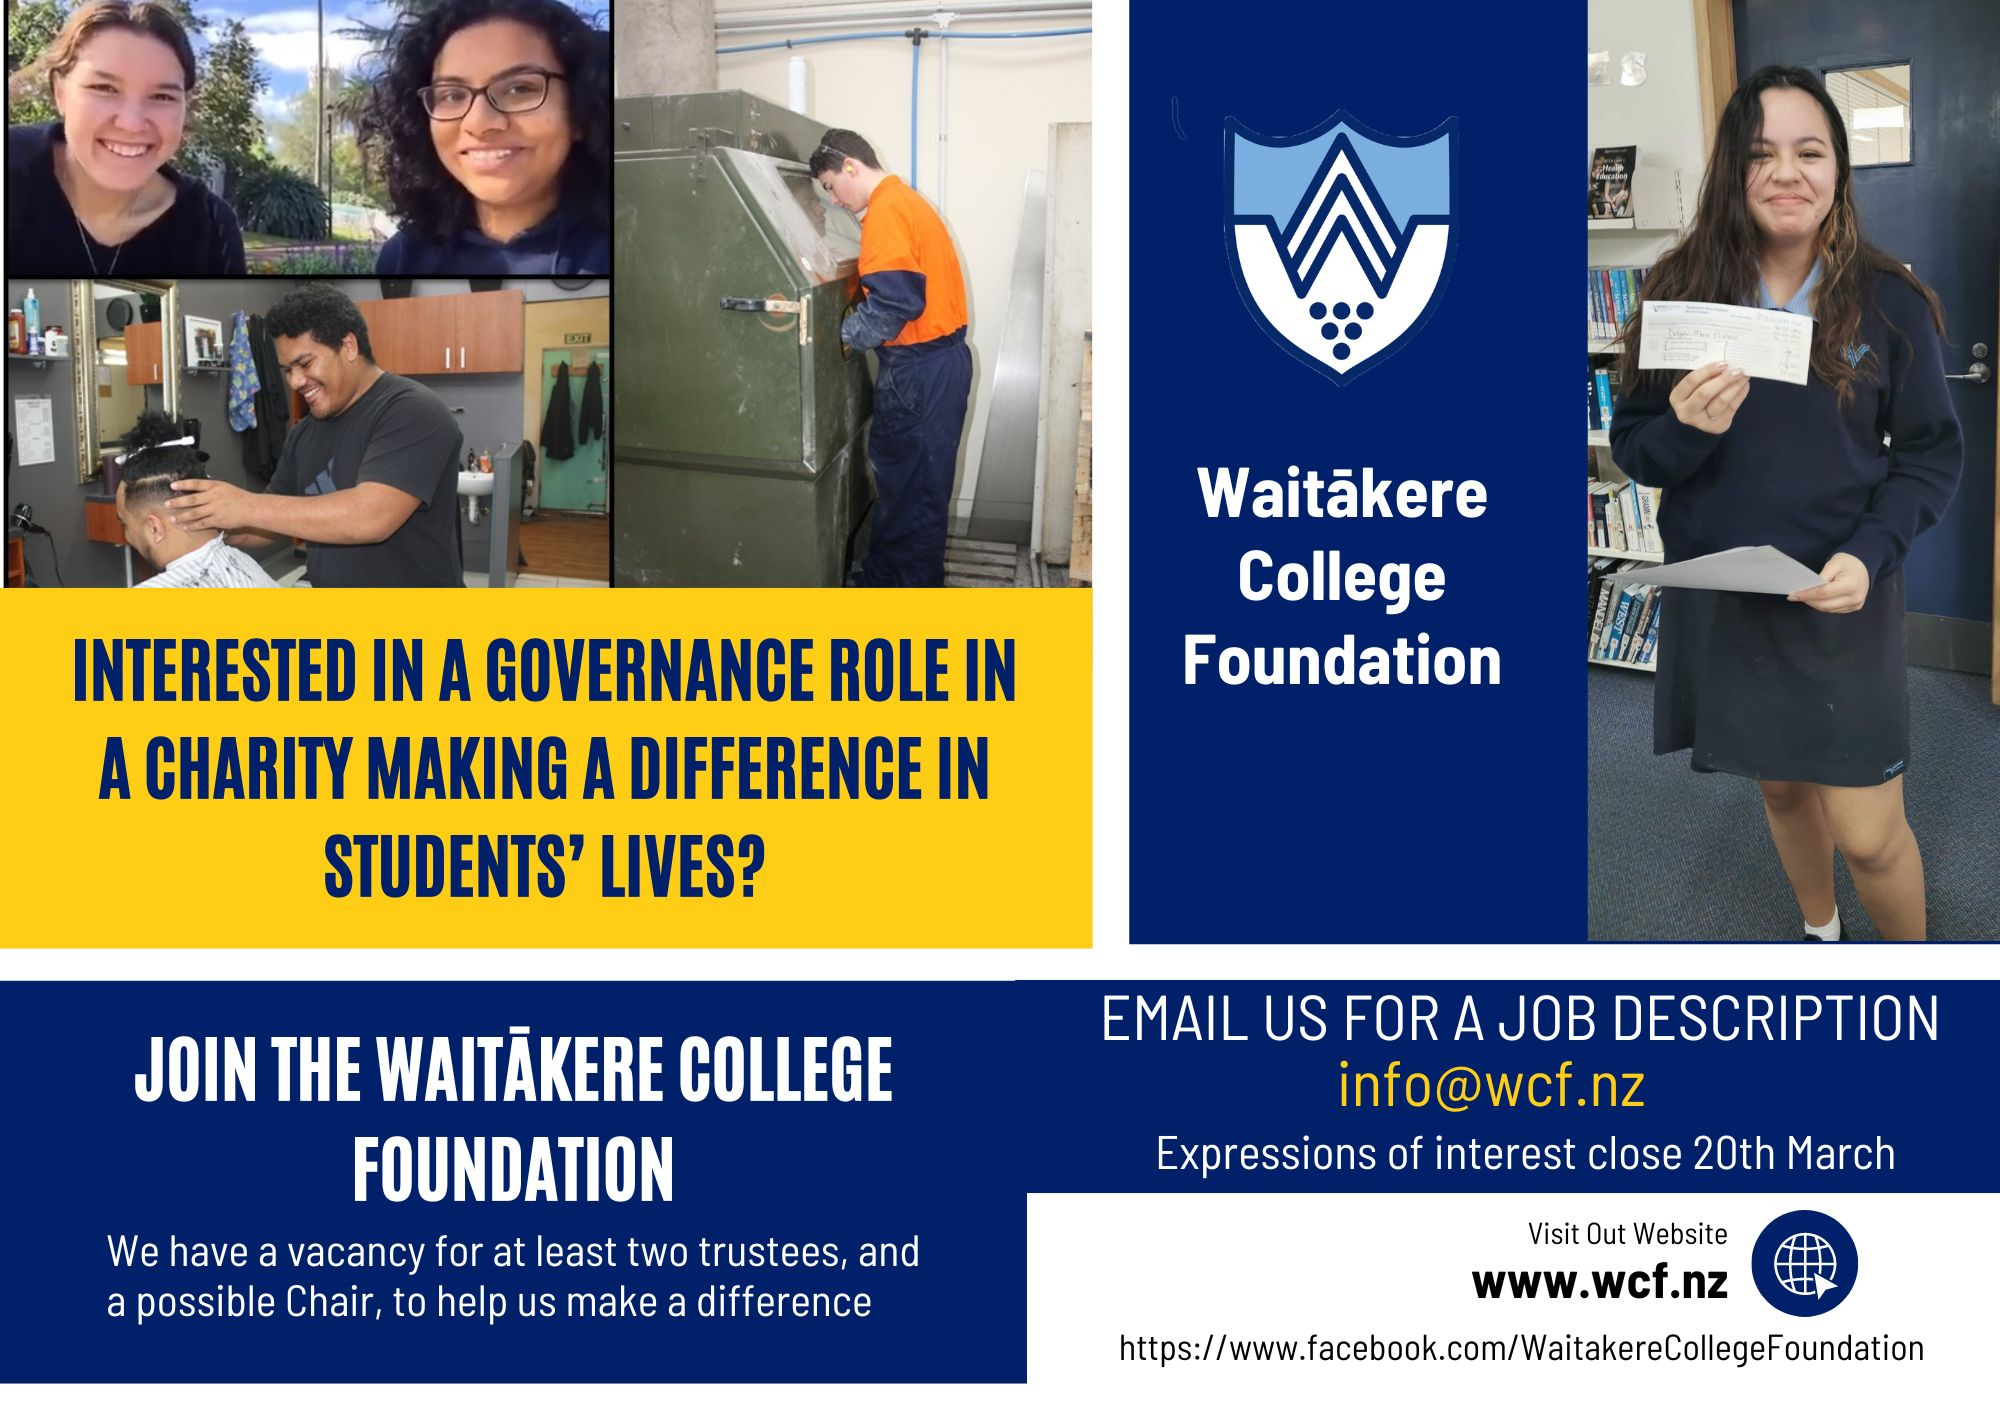 The Waitakere College Foundation is Looking for New Trustees